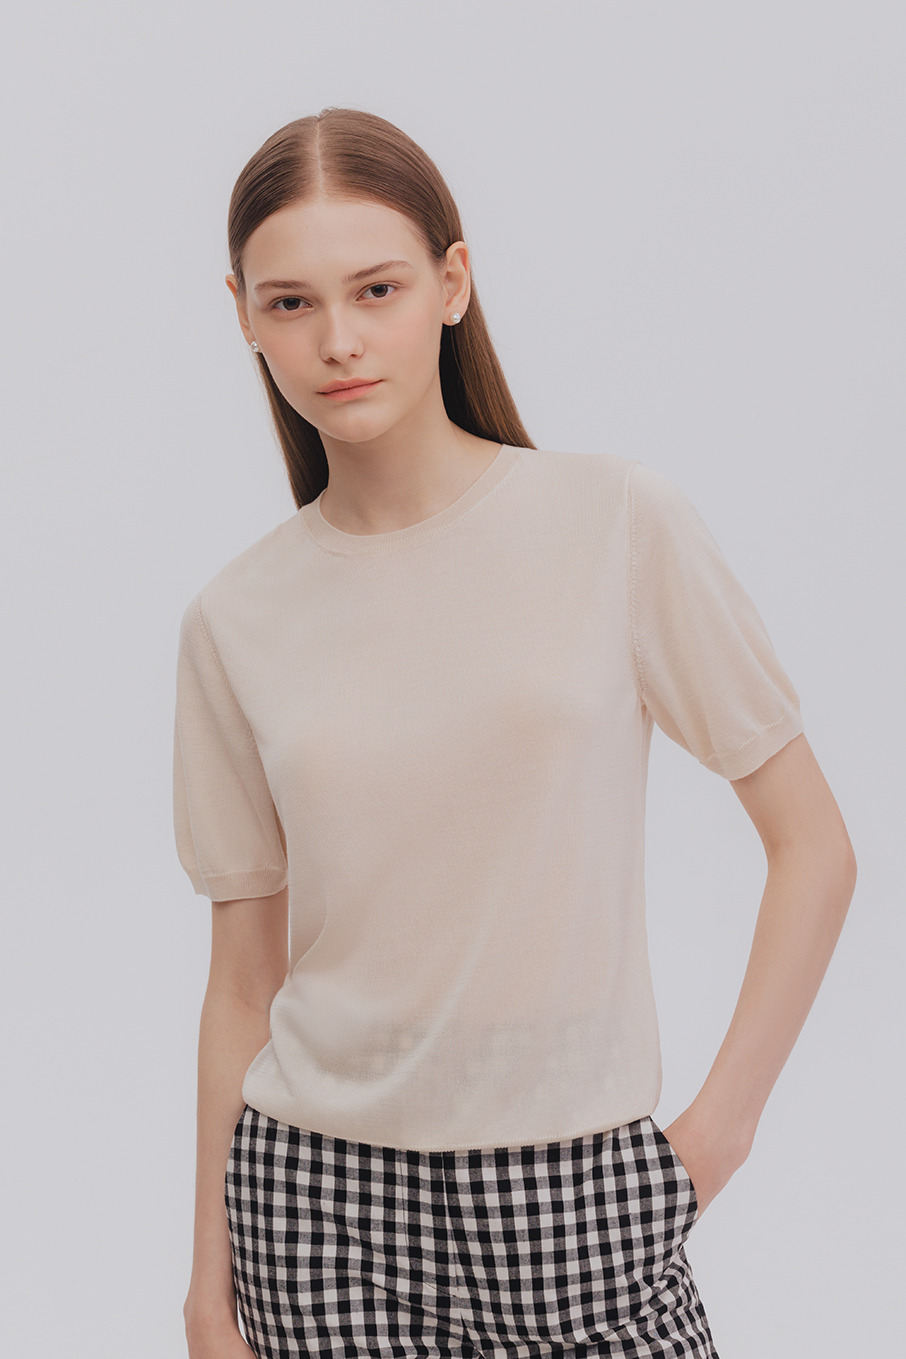 Rorier knit top (Ivory)